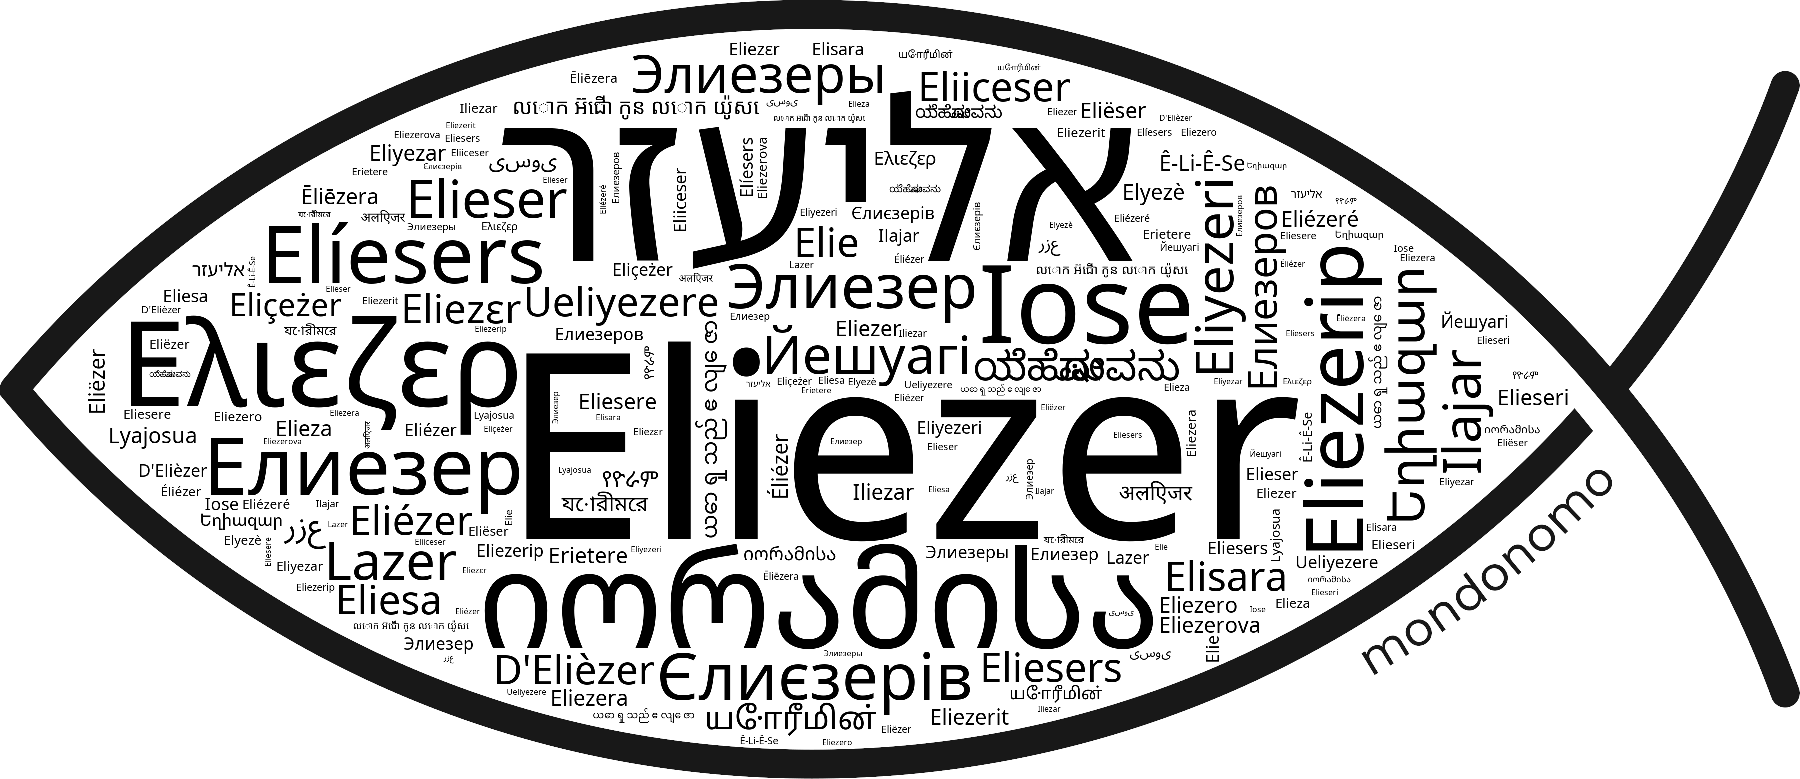 Name Eliezer in the world's Bibles